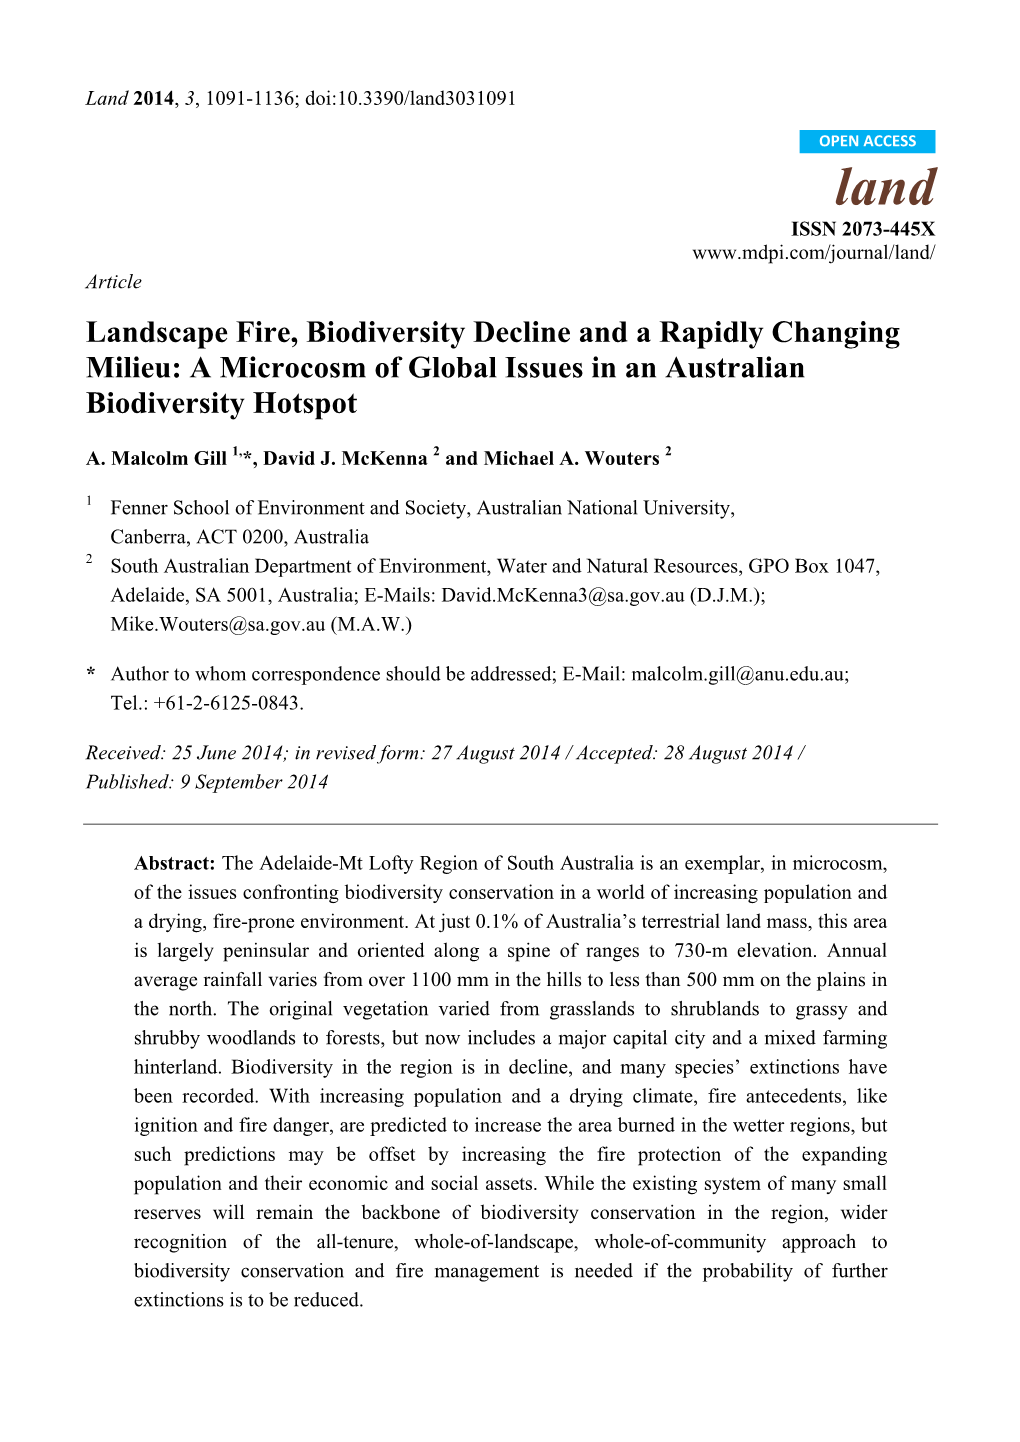 Landscape Fire, Biodiversity Decline and a Rapidly Changing Milieu: a Microcosm of Global Issues in an Australian Biodiversity Hotspot